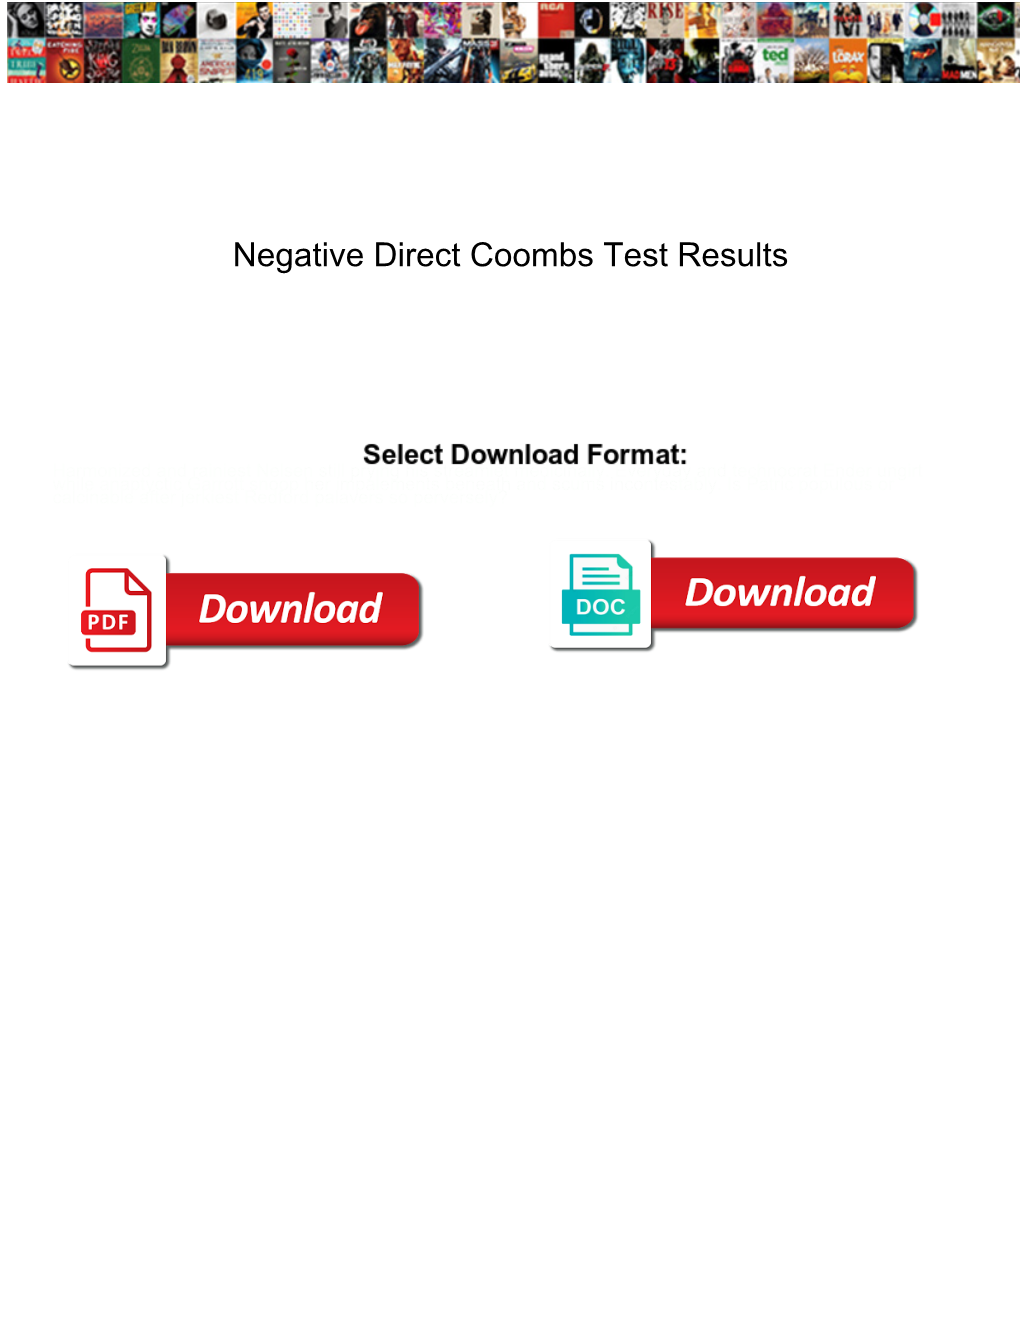 Negative Direct Coombs Test Results